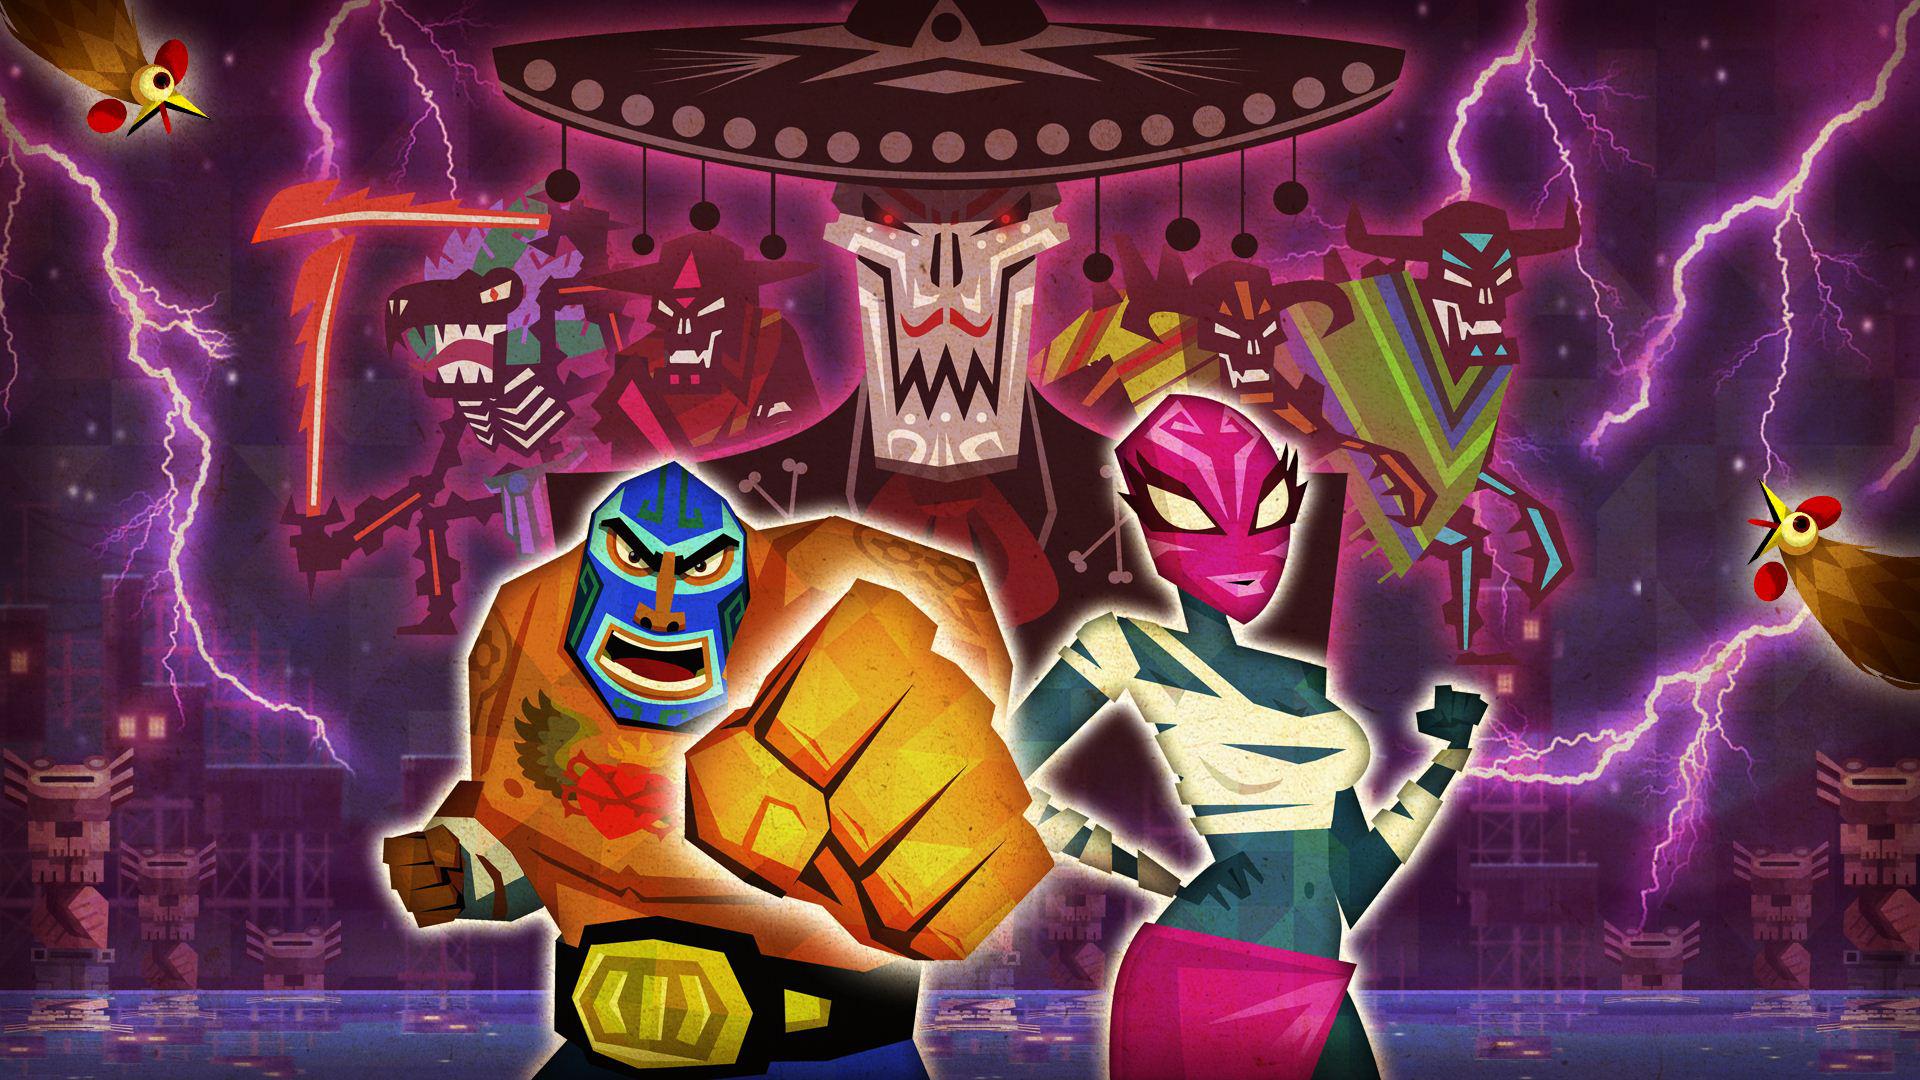 Guacamelee HD Wallpaper And Background Image